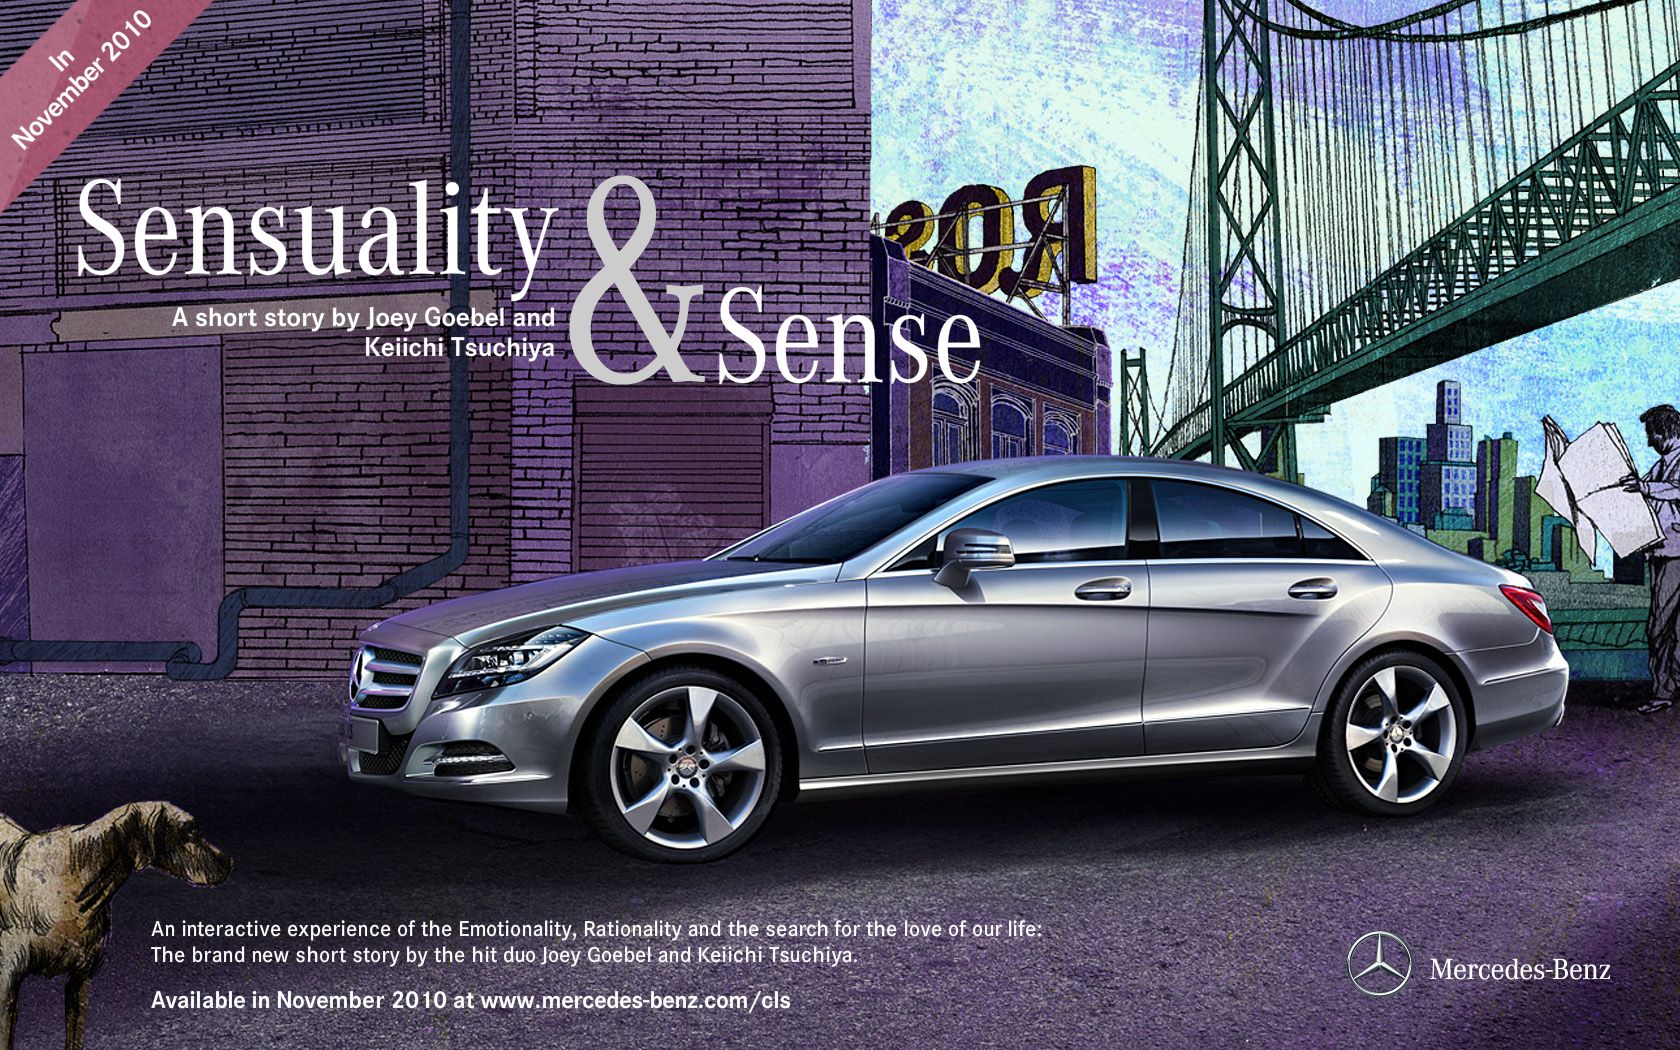 Downloadable personalized wallpaper in new CLS web special 